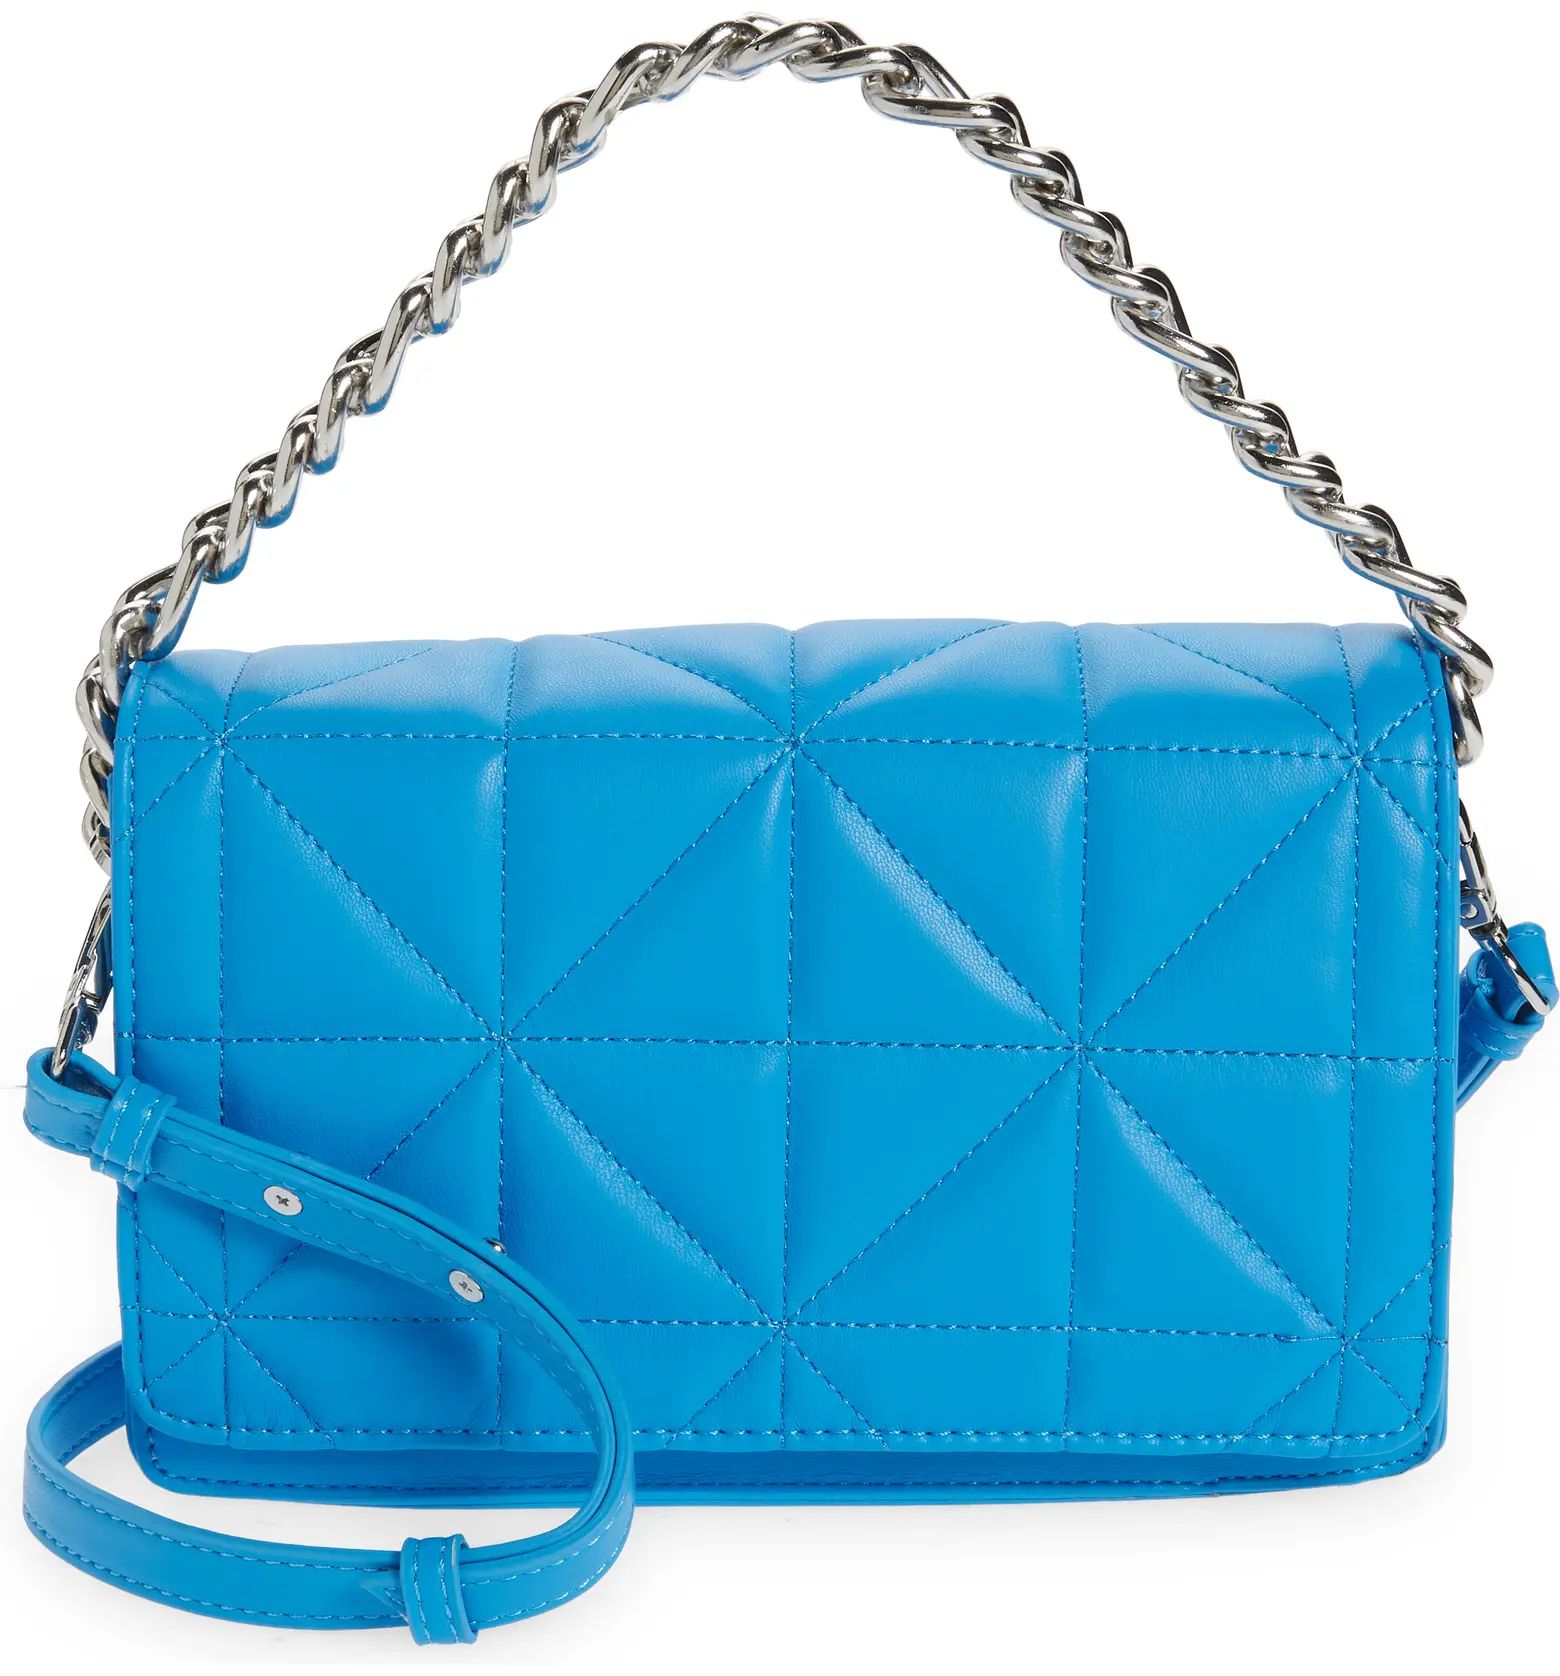 Topshop Cali Quilted Chain Faux Leather Crossbody Bag | Nordstrom | Nordstrom